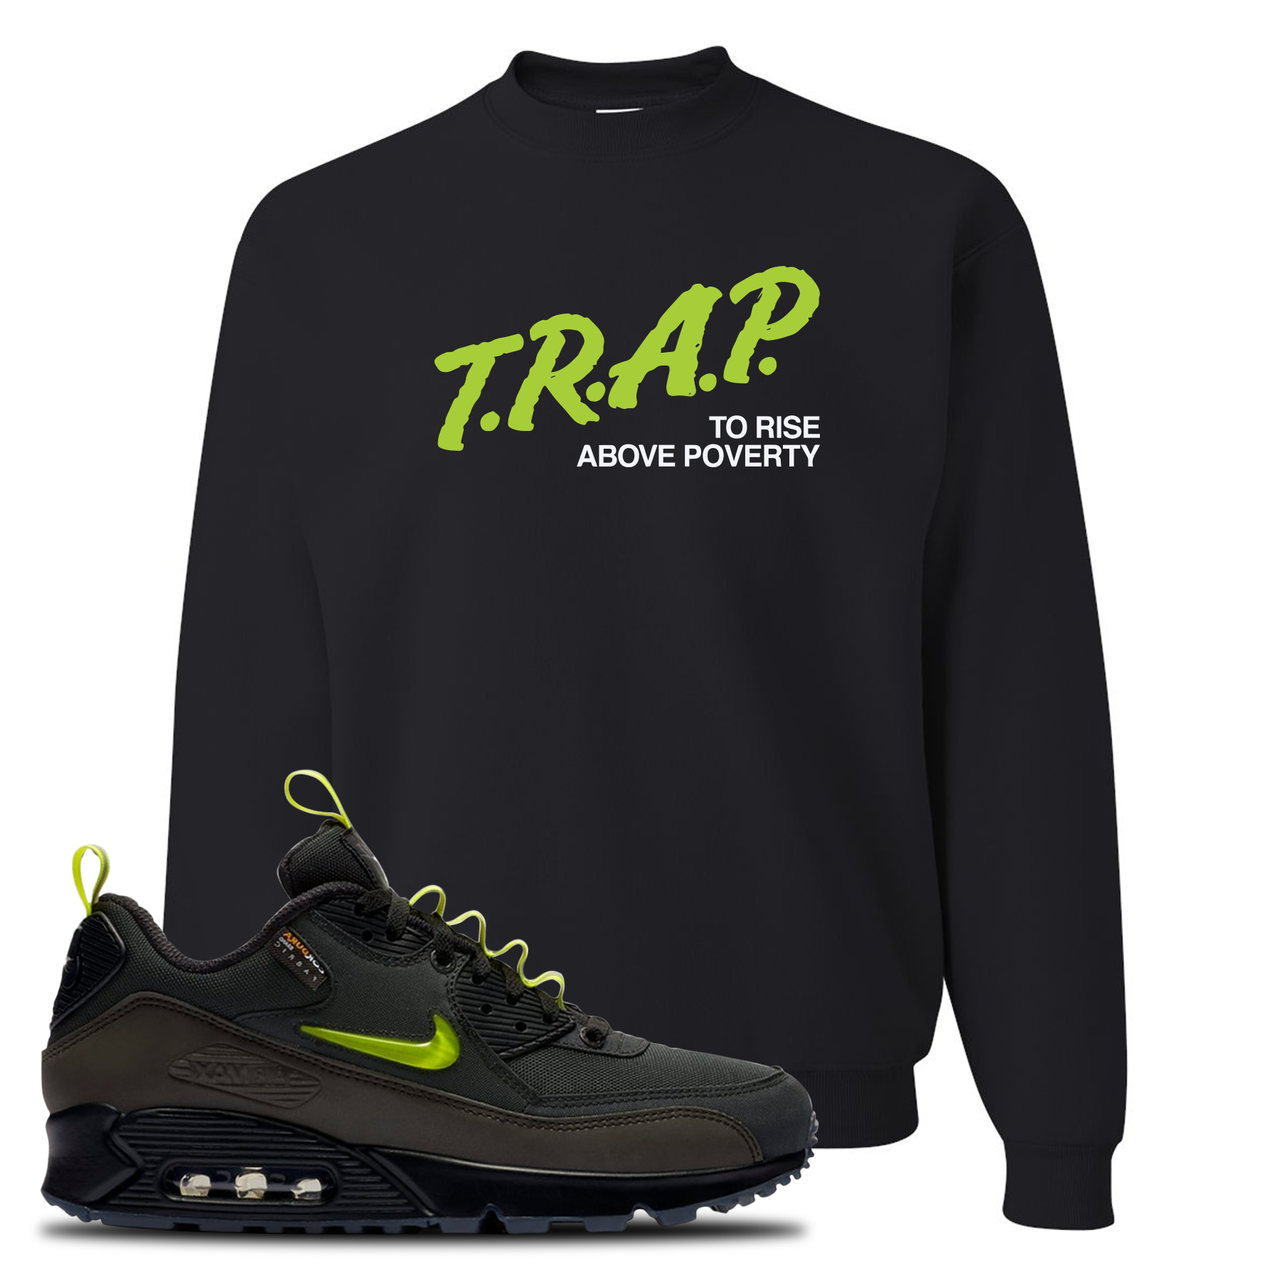 The Basement X Air Max 90 Manchester Trap to Rise Above Poverty Black Sneaker Hook Up Crewneck Sweatshirt